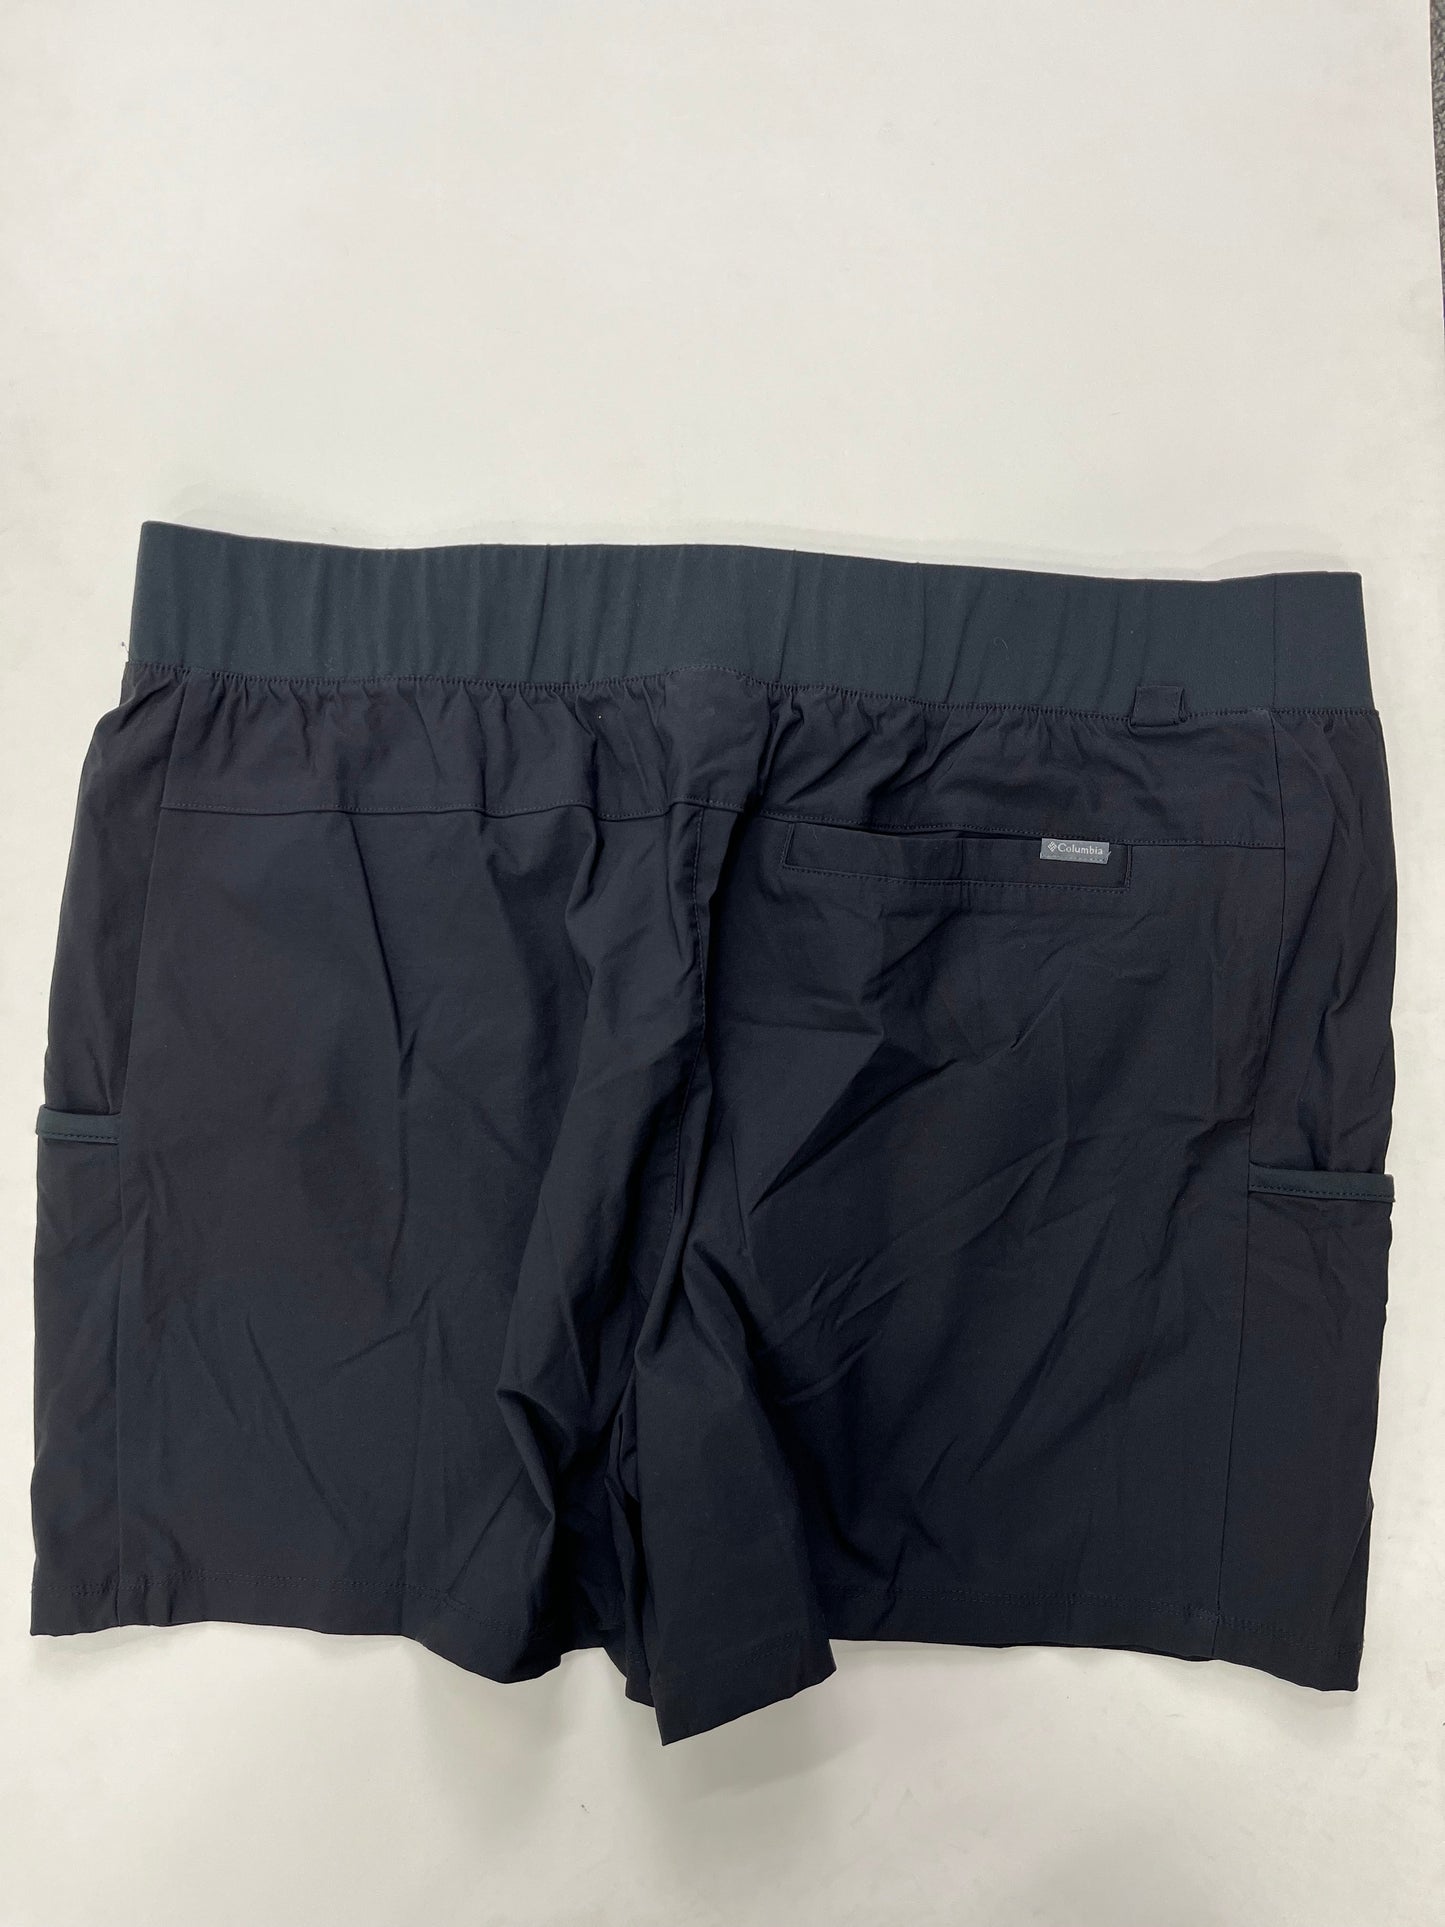 Athletic Shorts By Columbia  Size: 2x